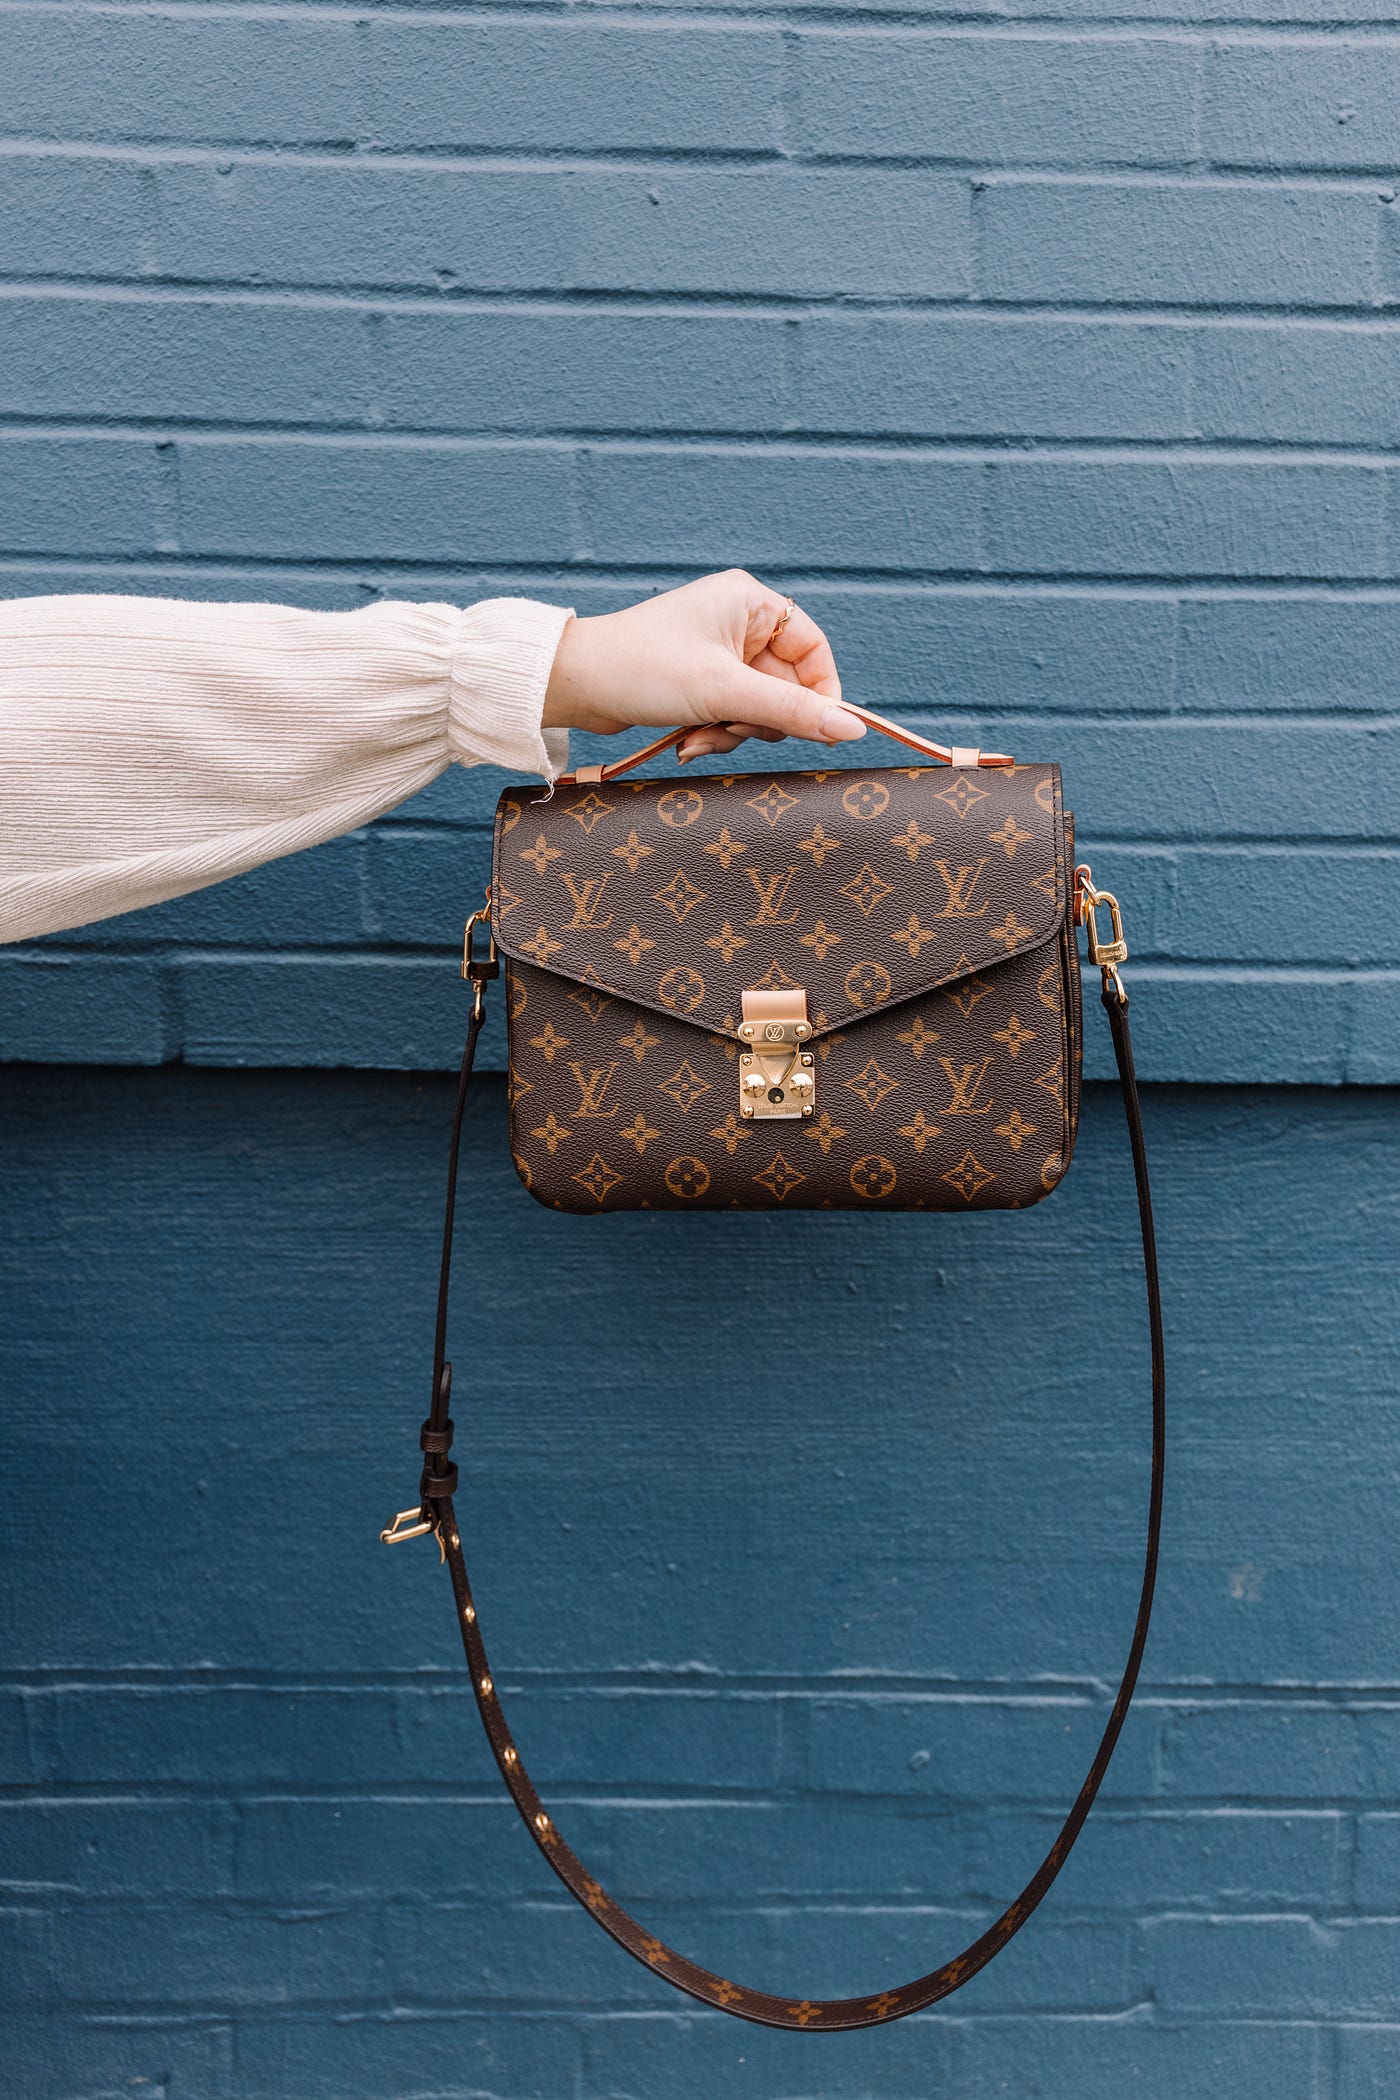 15 Most Expensive Louis Vuitton Bags That Will Blow Your Mind